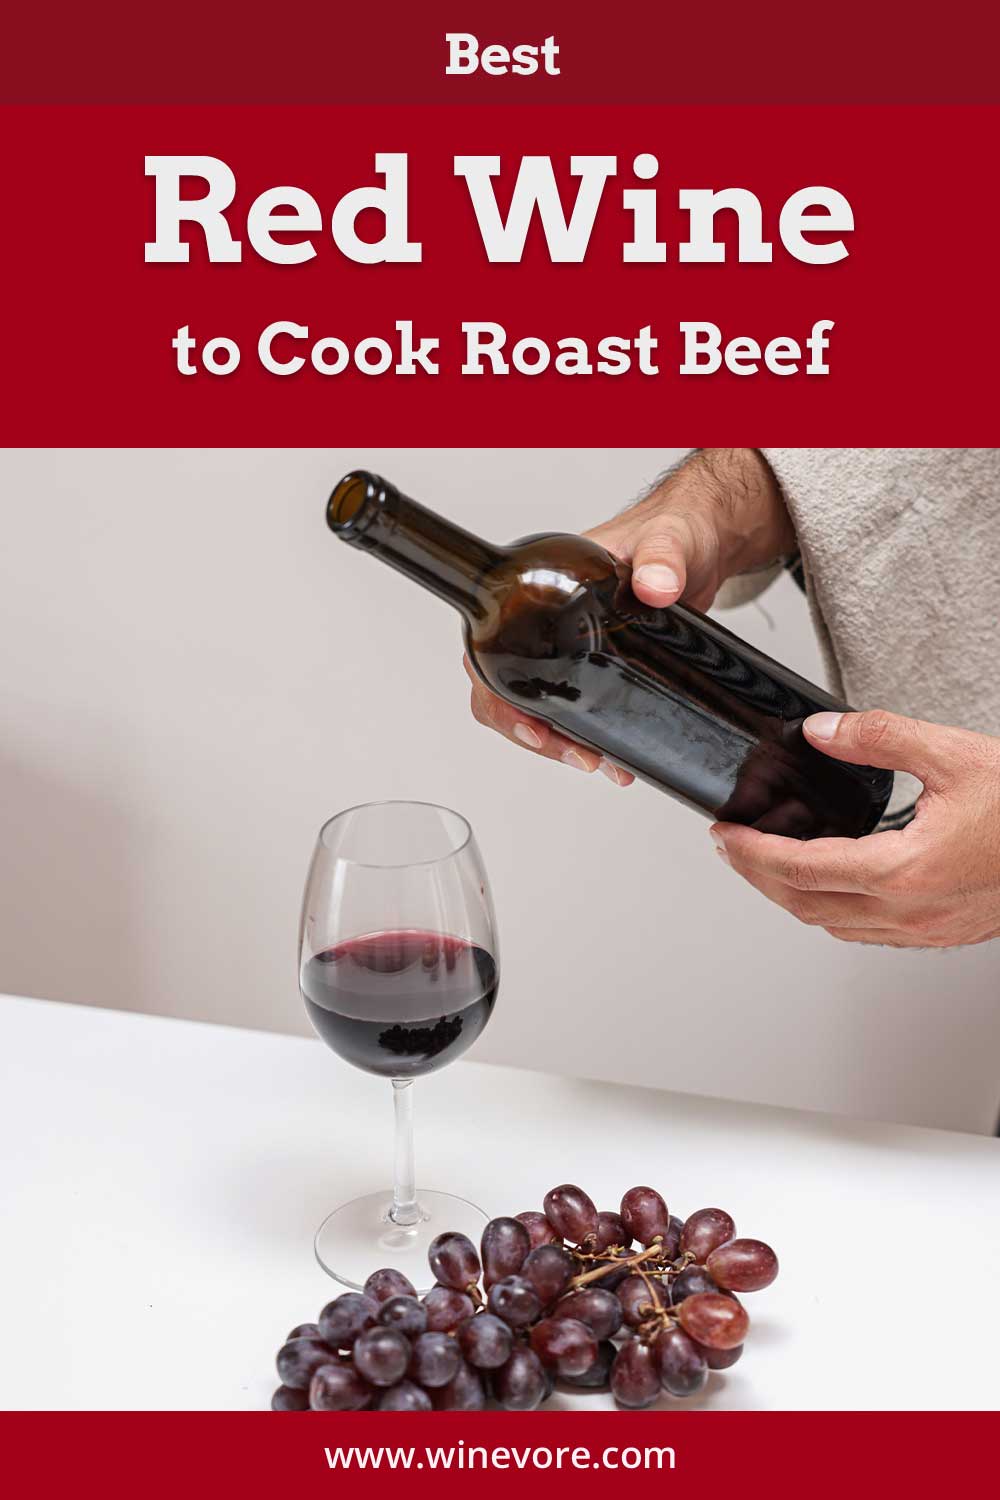 A bottle of wine held by two hands over a glass of wine with a bunch of grapes on a table - Best Red Wine to Cook Roast Beef.